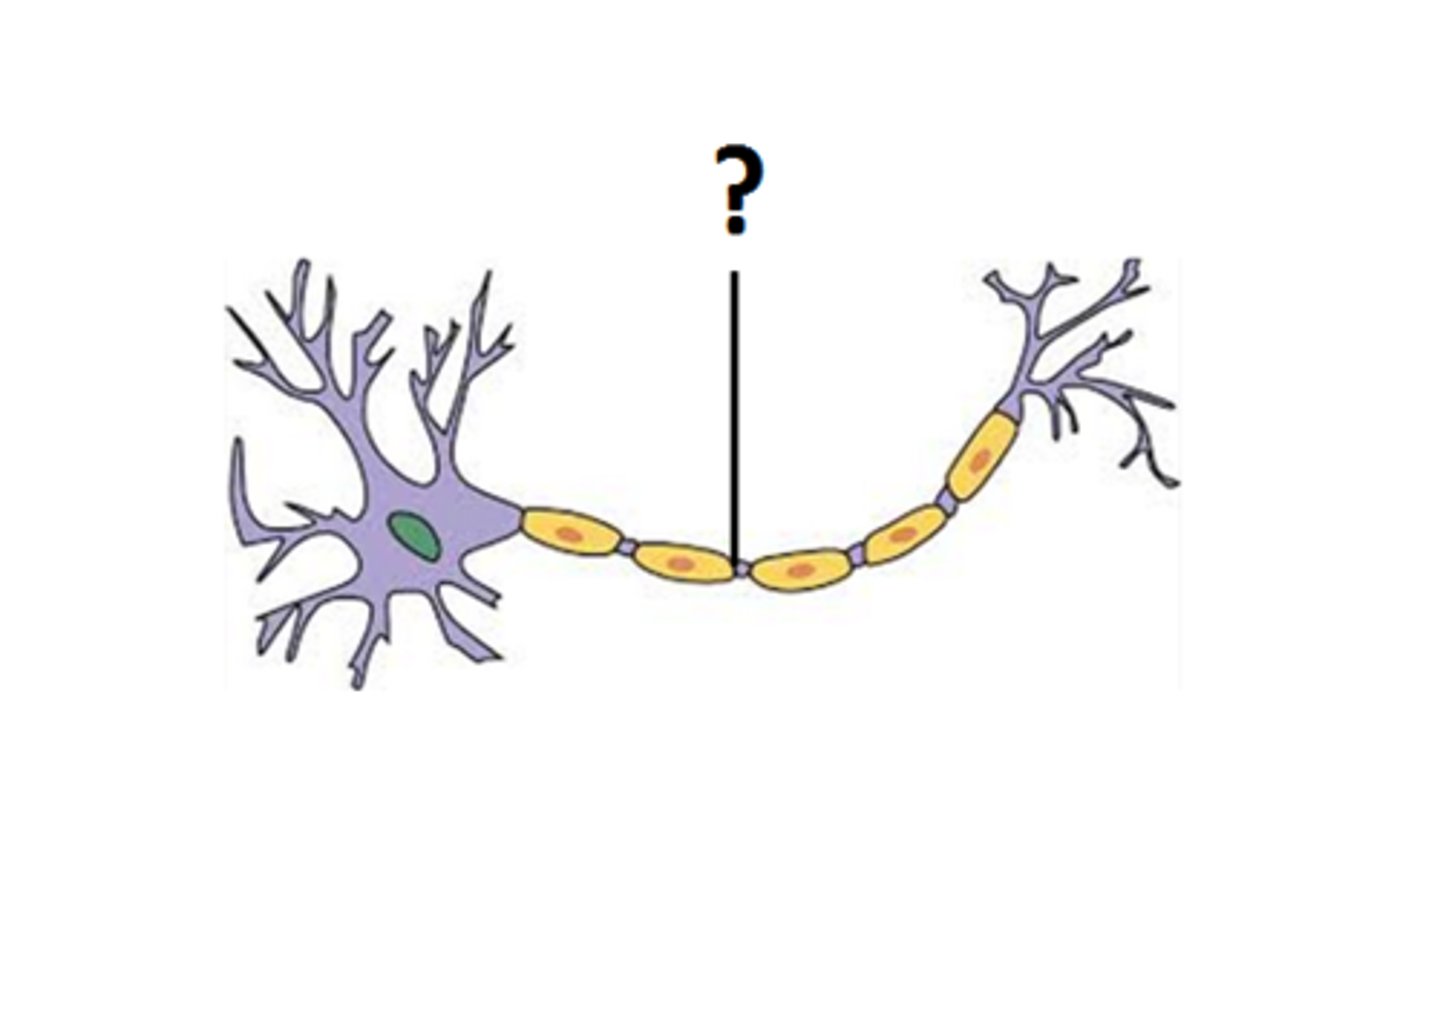 <p>only one per neuron, a fiber that emerges from cell body and proejcts to target cells to propagate nerve impulse</p>